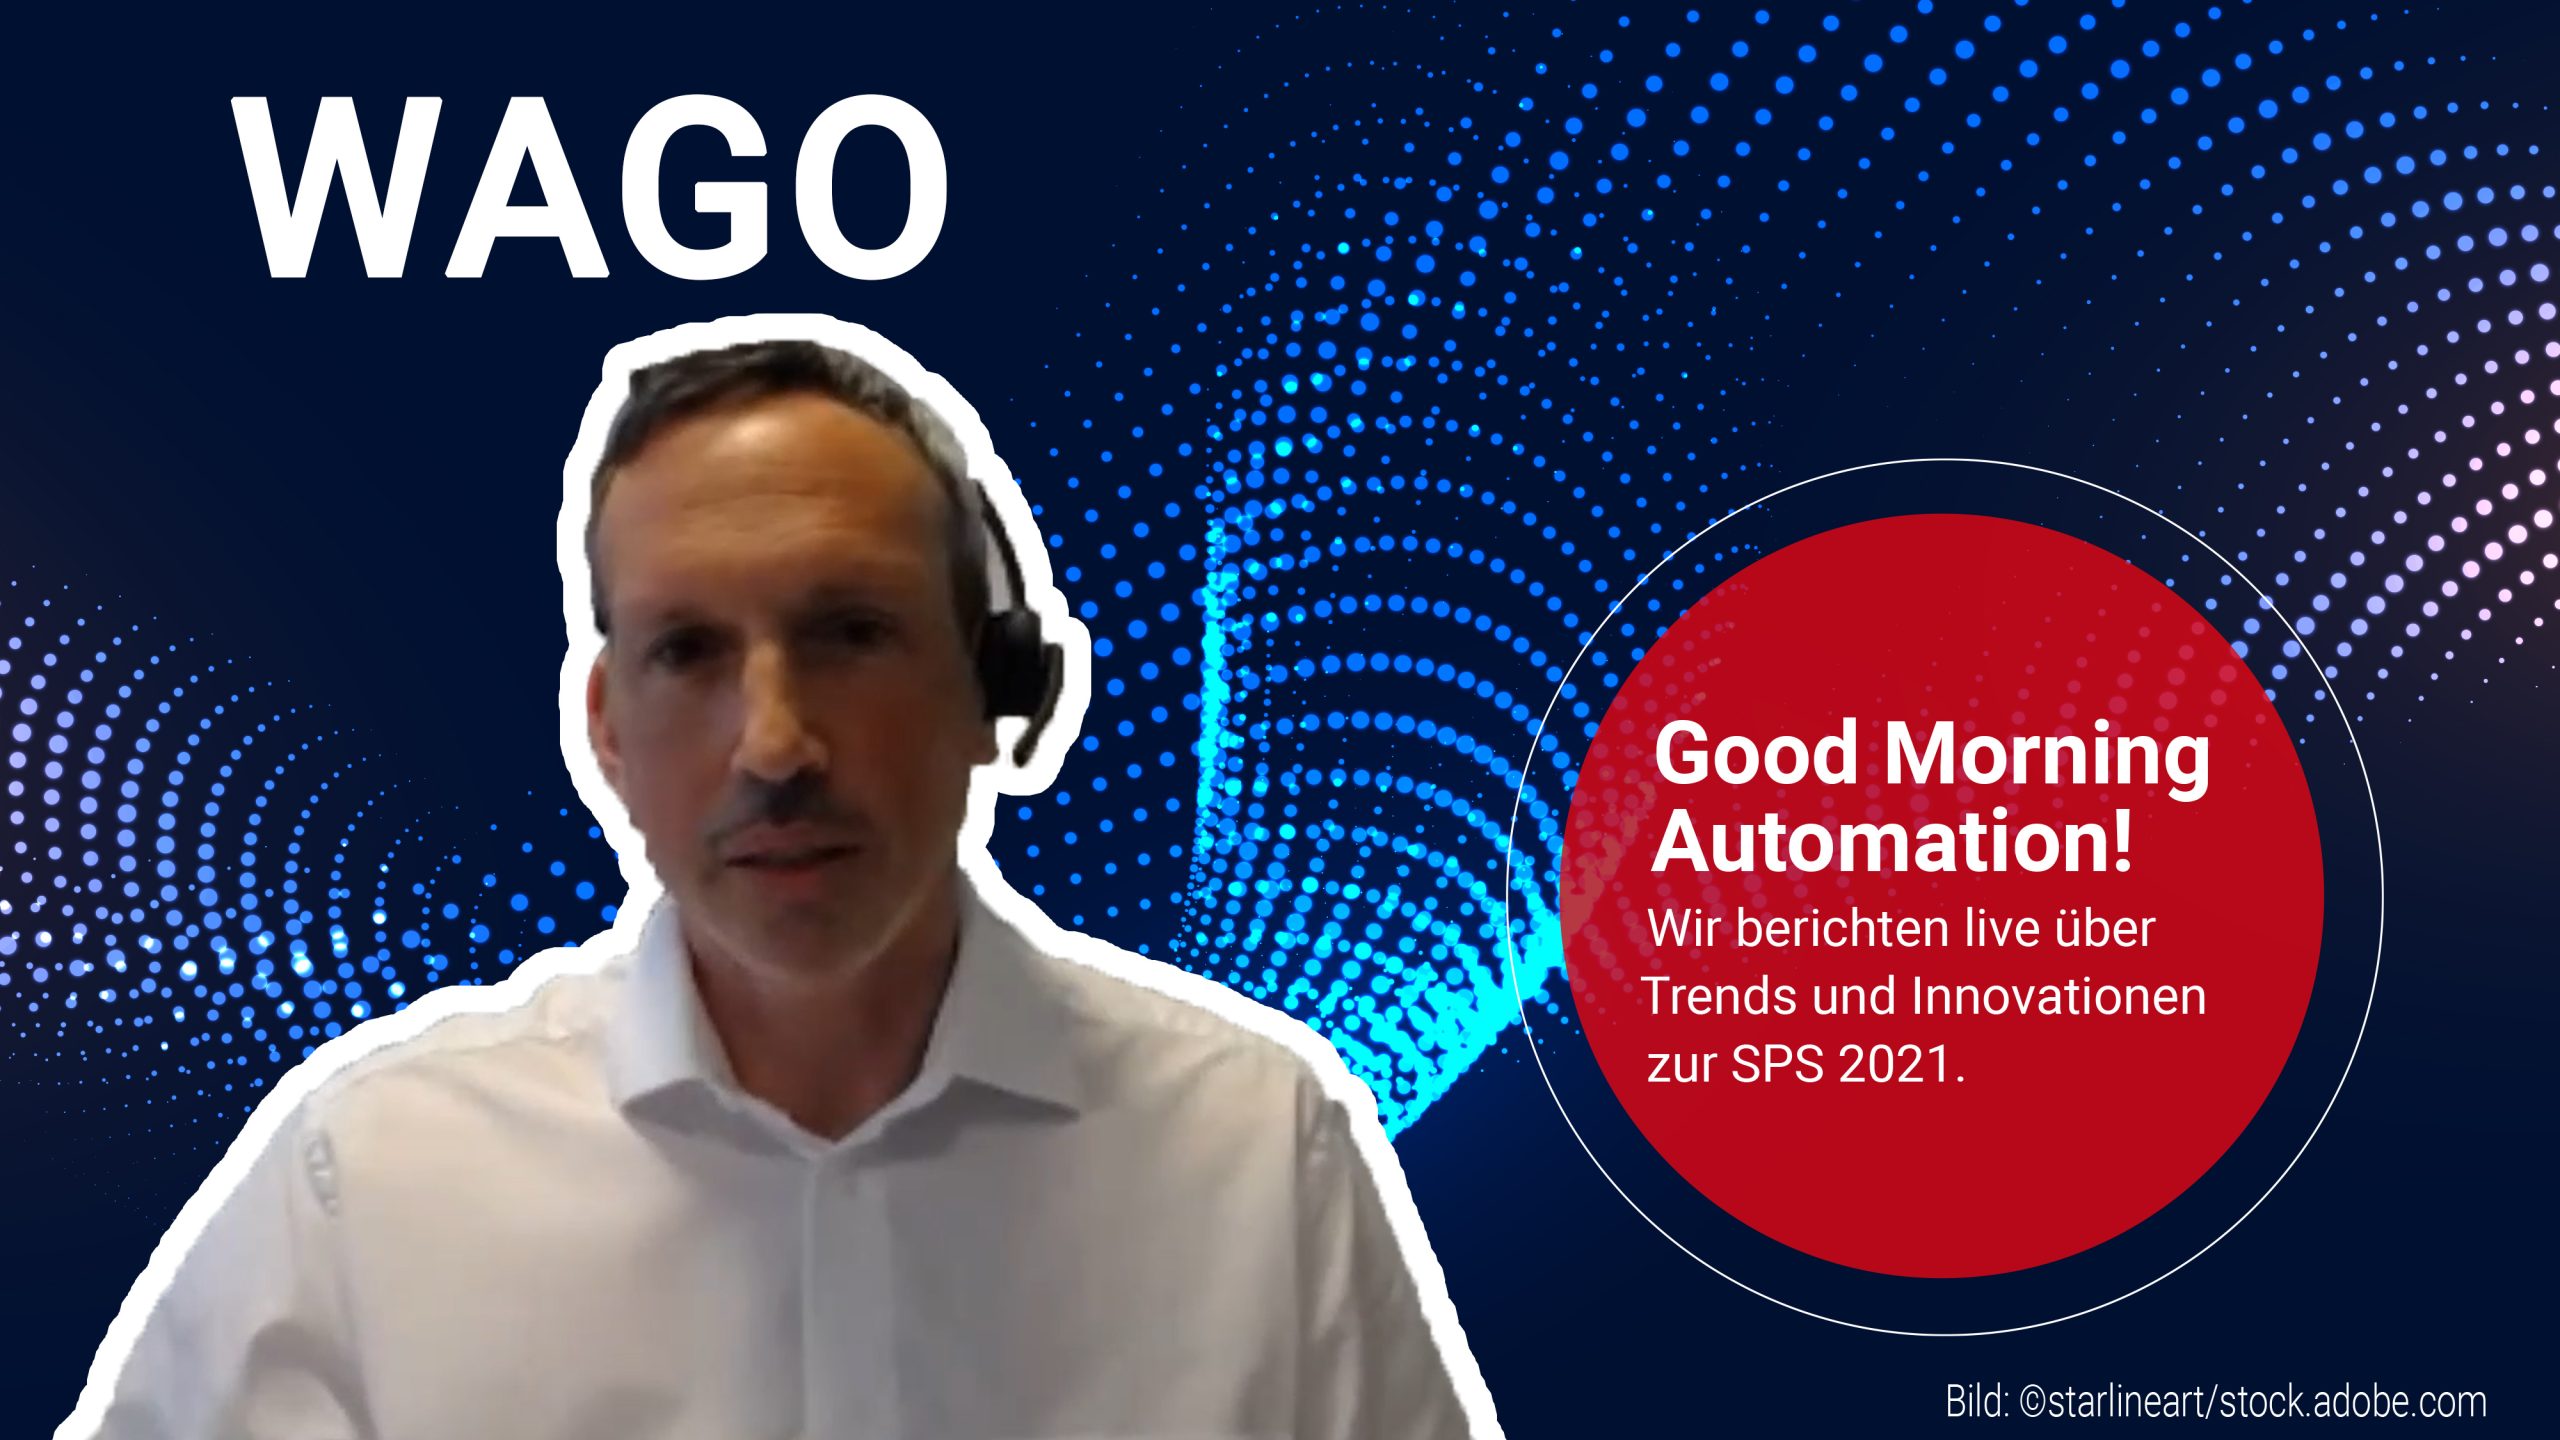 Wago bei Good Morning Automation Tag 3